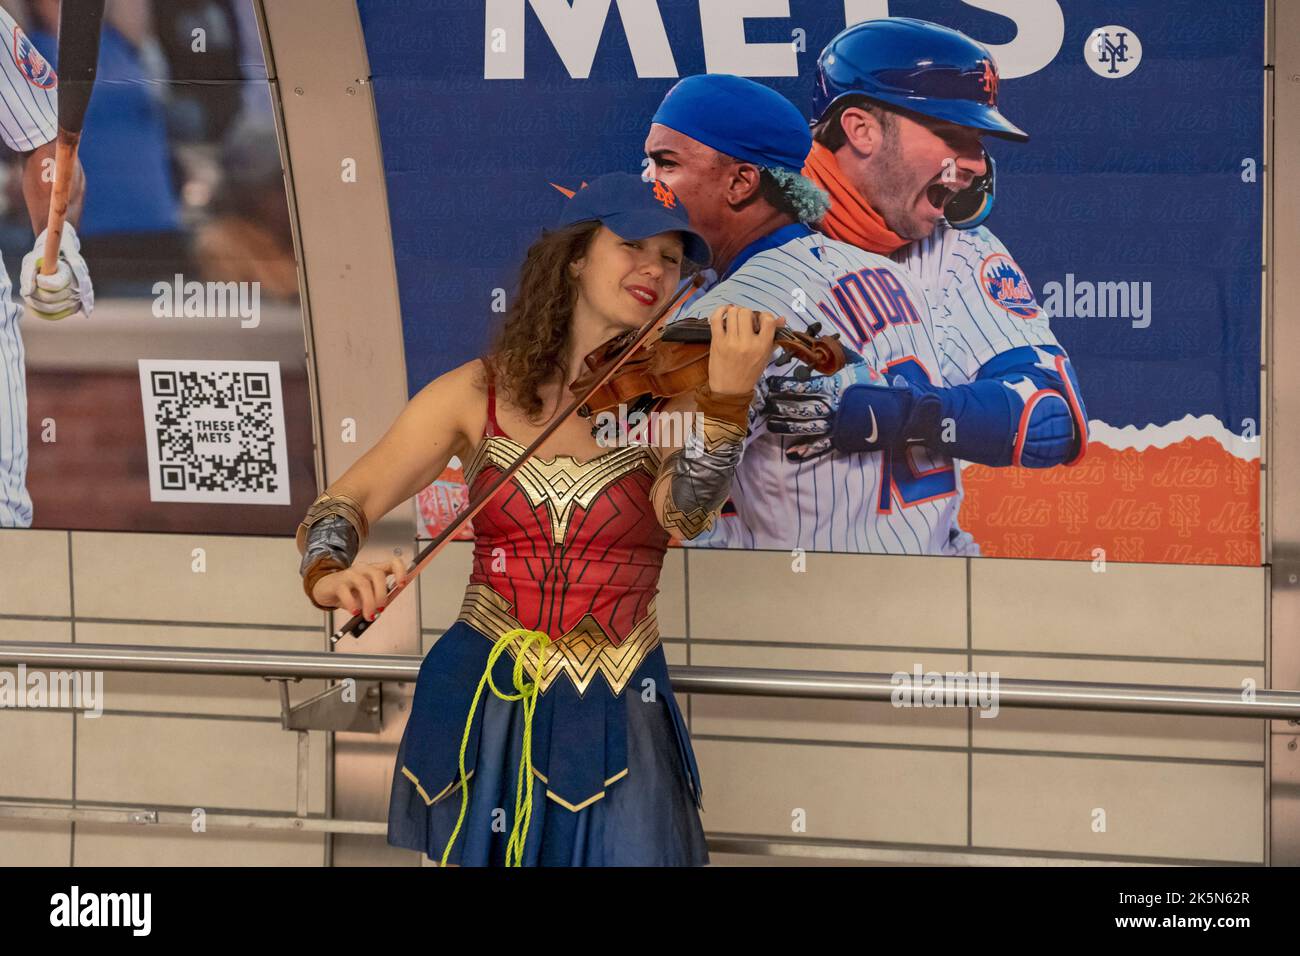 NEW YORK, NEW YORK - OCTOBER 08: A woman dressed as Wonder Woman plays violin during New York Comic Con 2022 at the Hudson Yards subway station on October 08, 2022 in New York City. Credit: Ron Adar/Alamy Live News Stock Photo